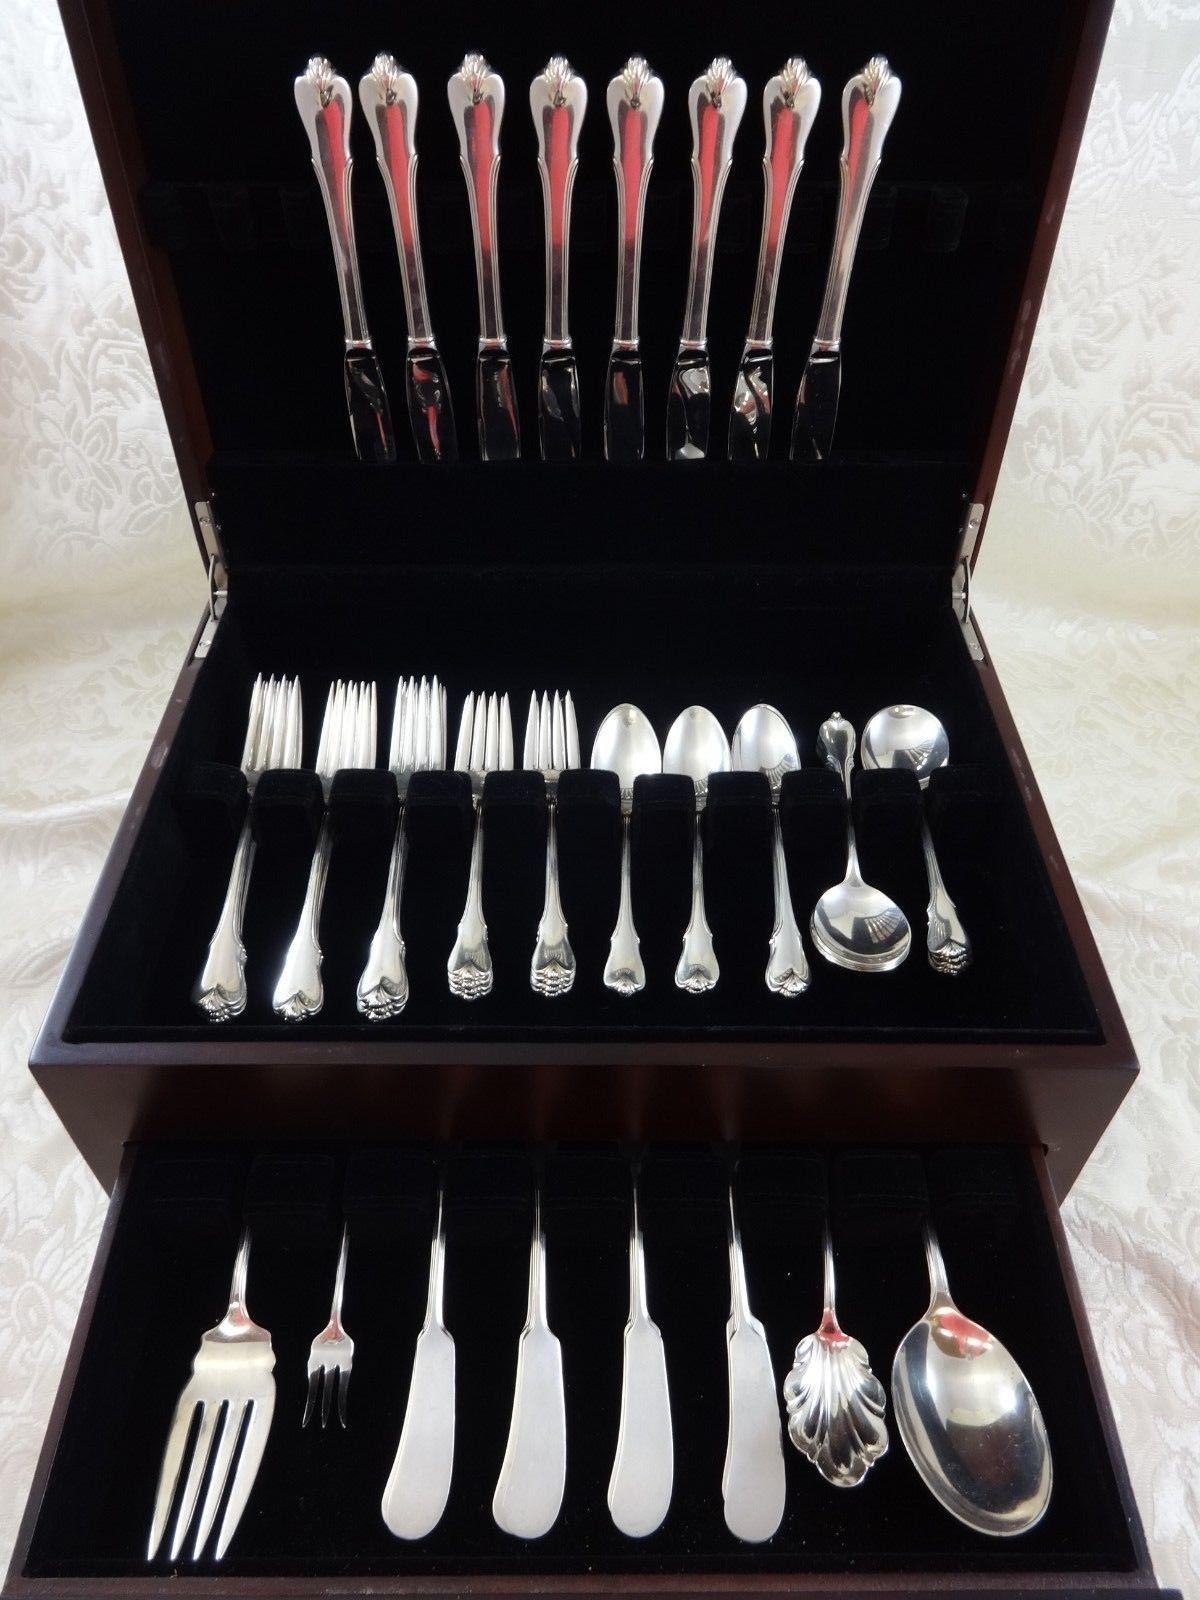 Grand Colonial by Wallace sterling silver flatware set of 52 pieces. This set includes:

8 knives, 8 7/8